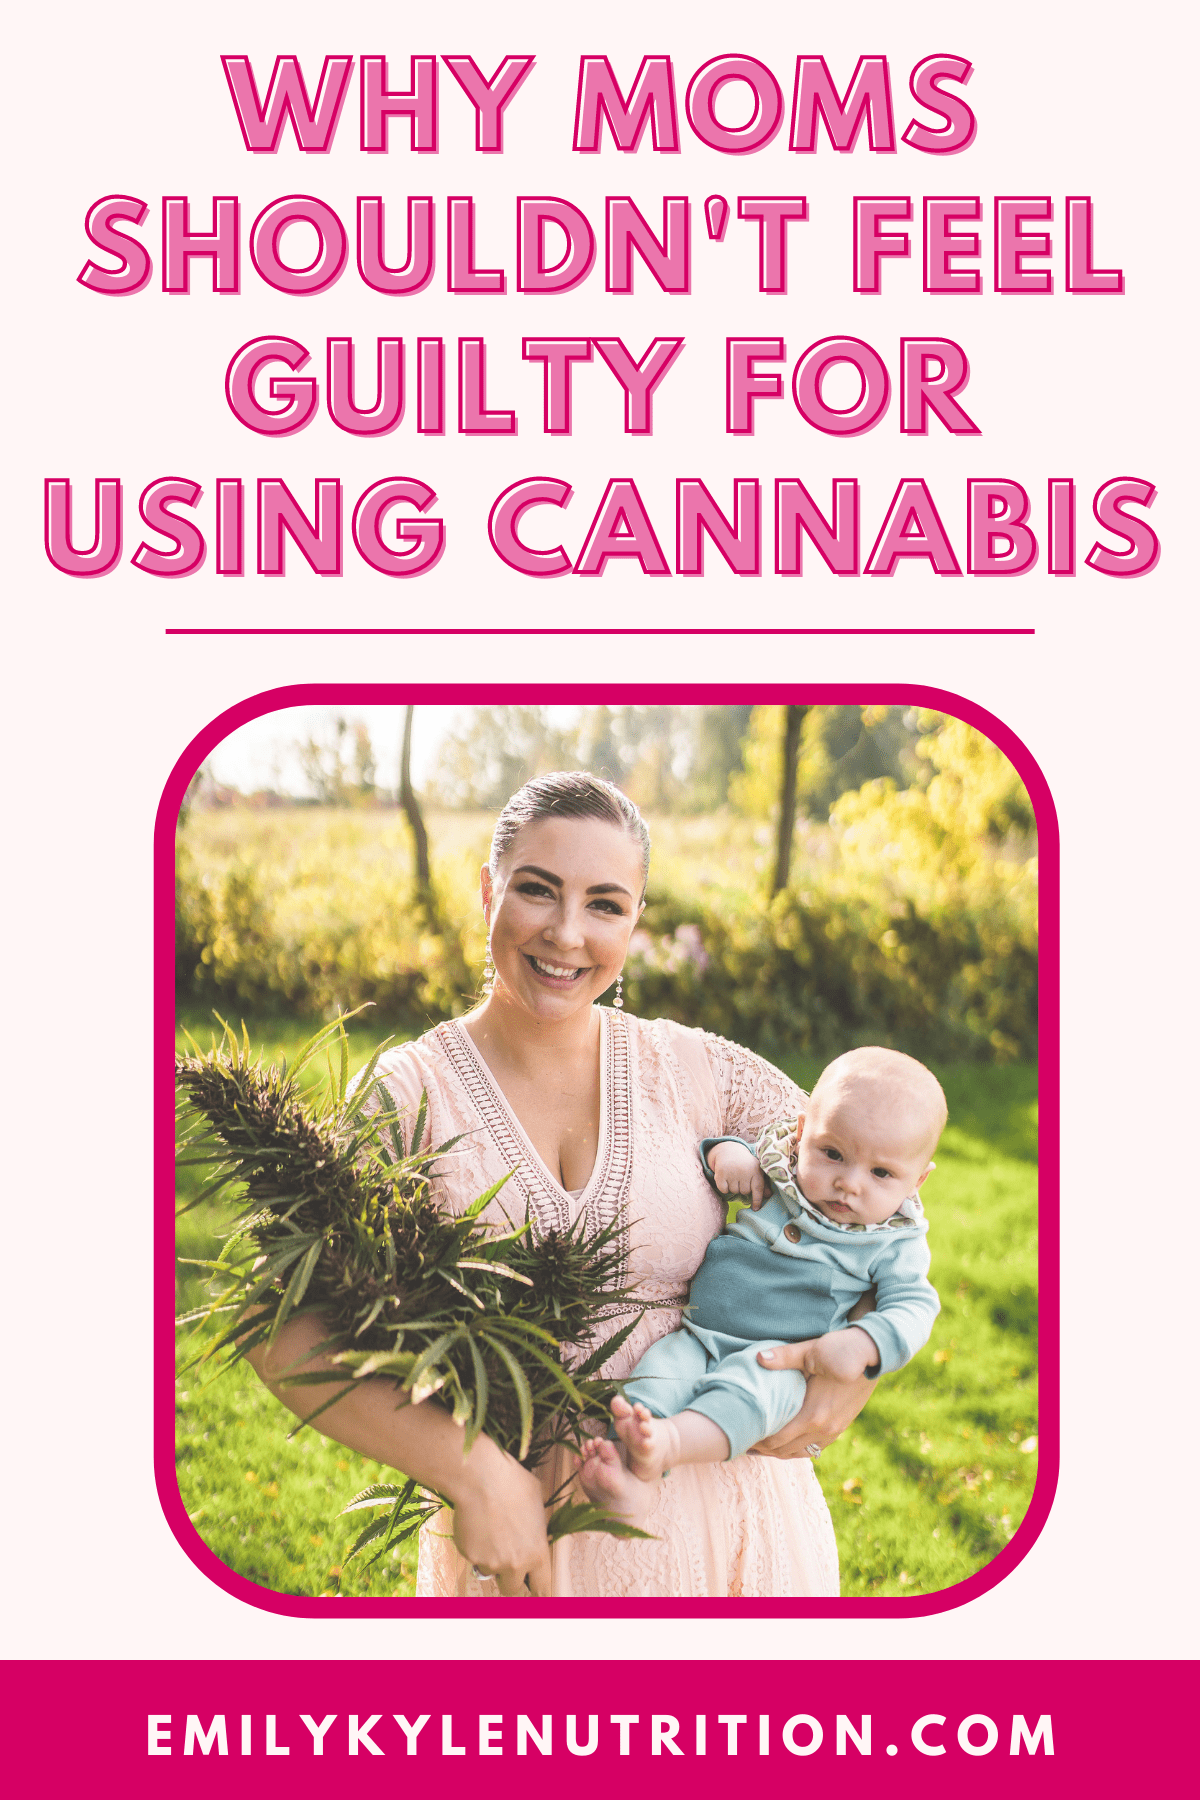 Why Moms Shouldn't Feel Guilty For Using Cannabis